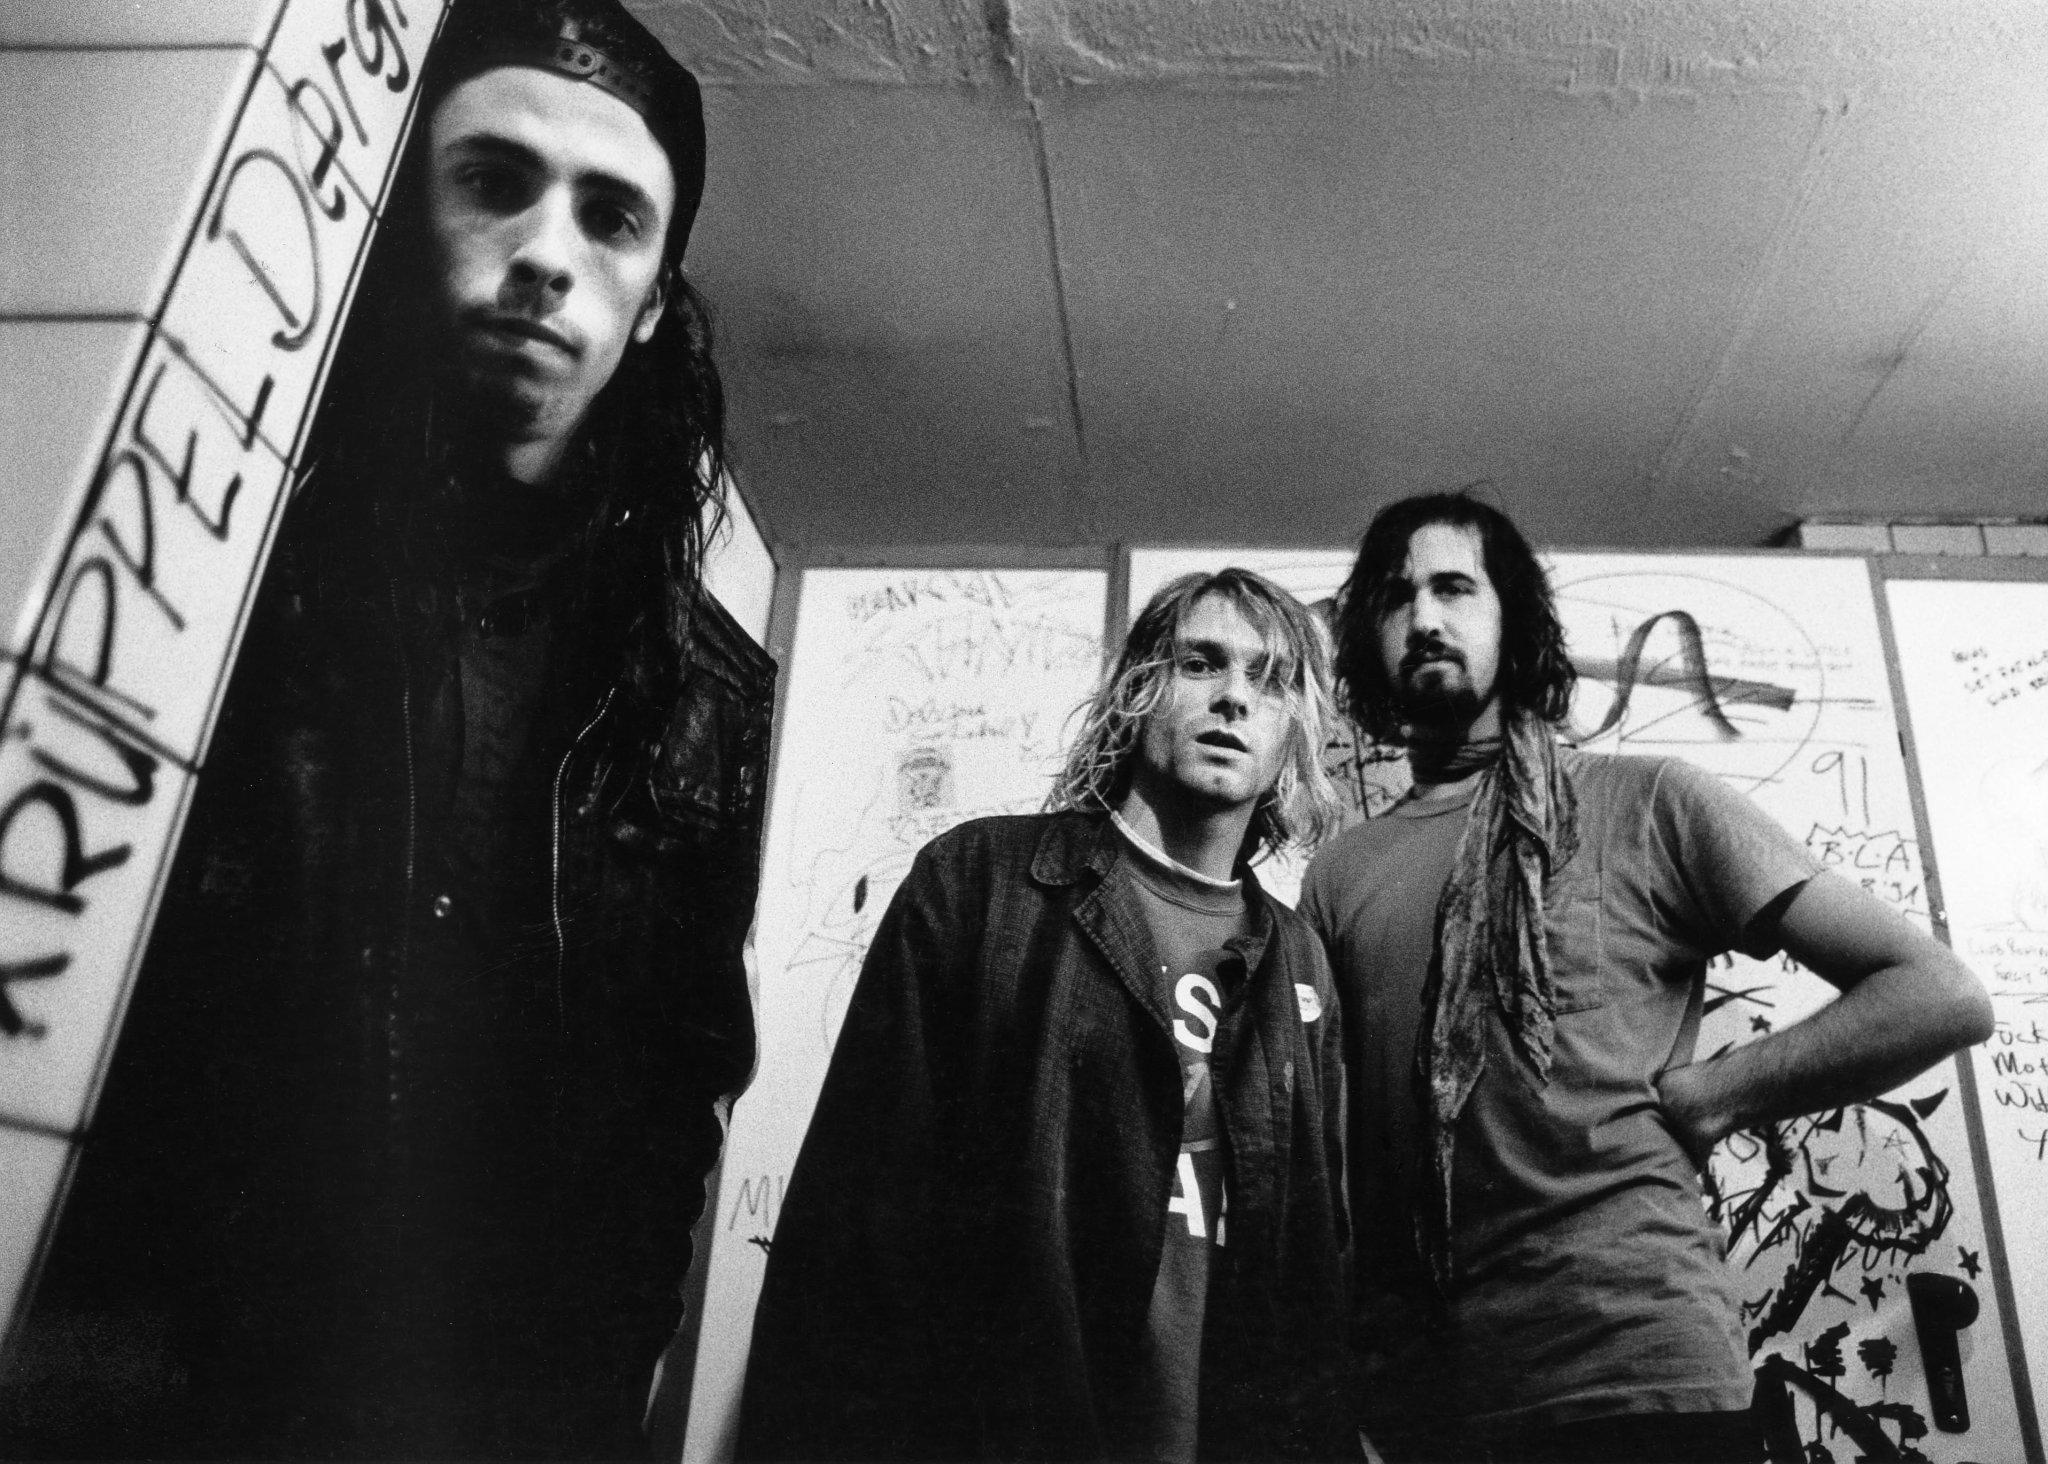 The Most Influential Artists: #1 Nirvana